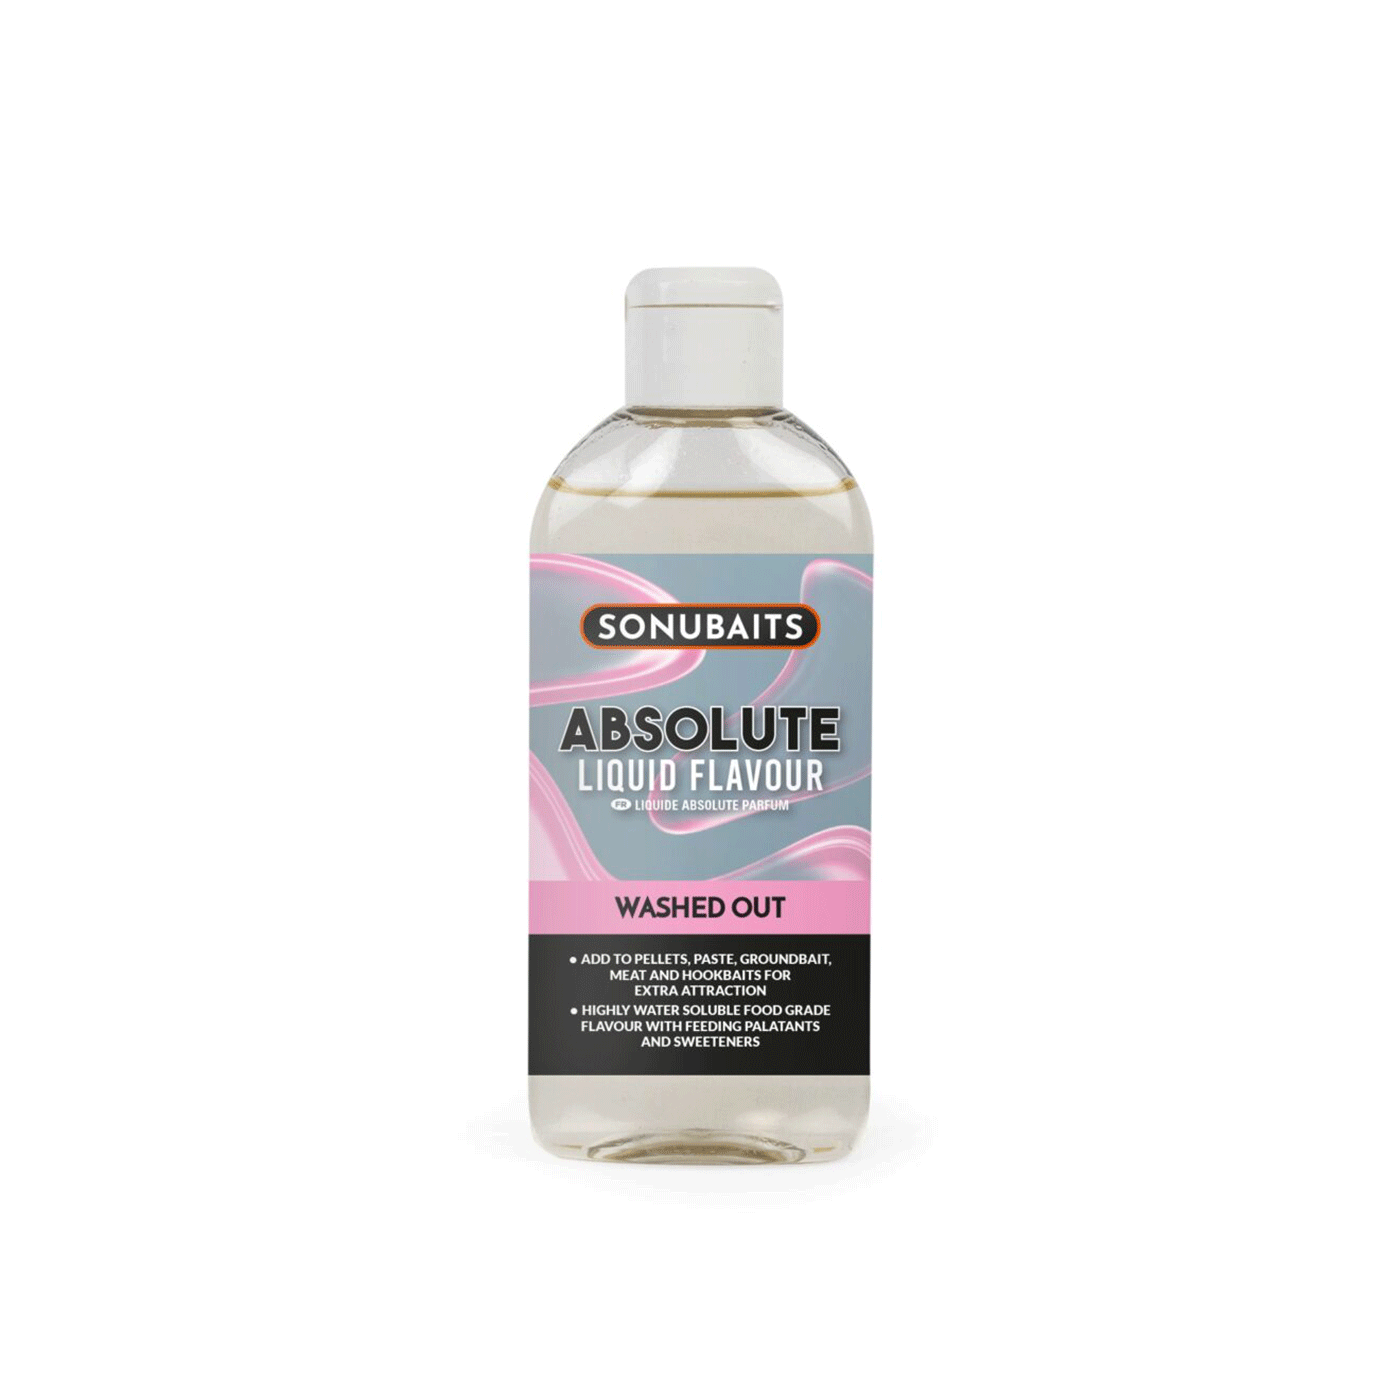 SONUBAITS - ABSOLUTE LIQUID FLAVOUR WASHED OUT 200ml